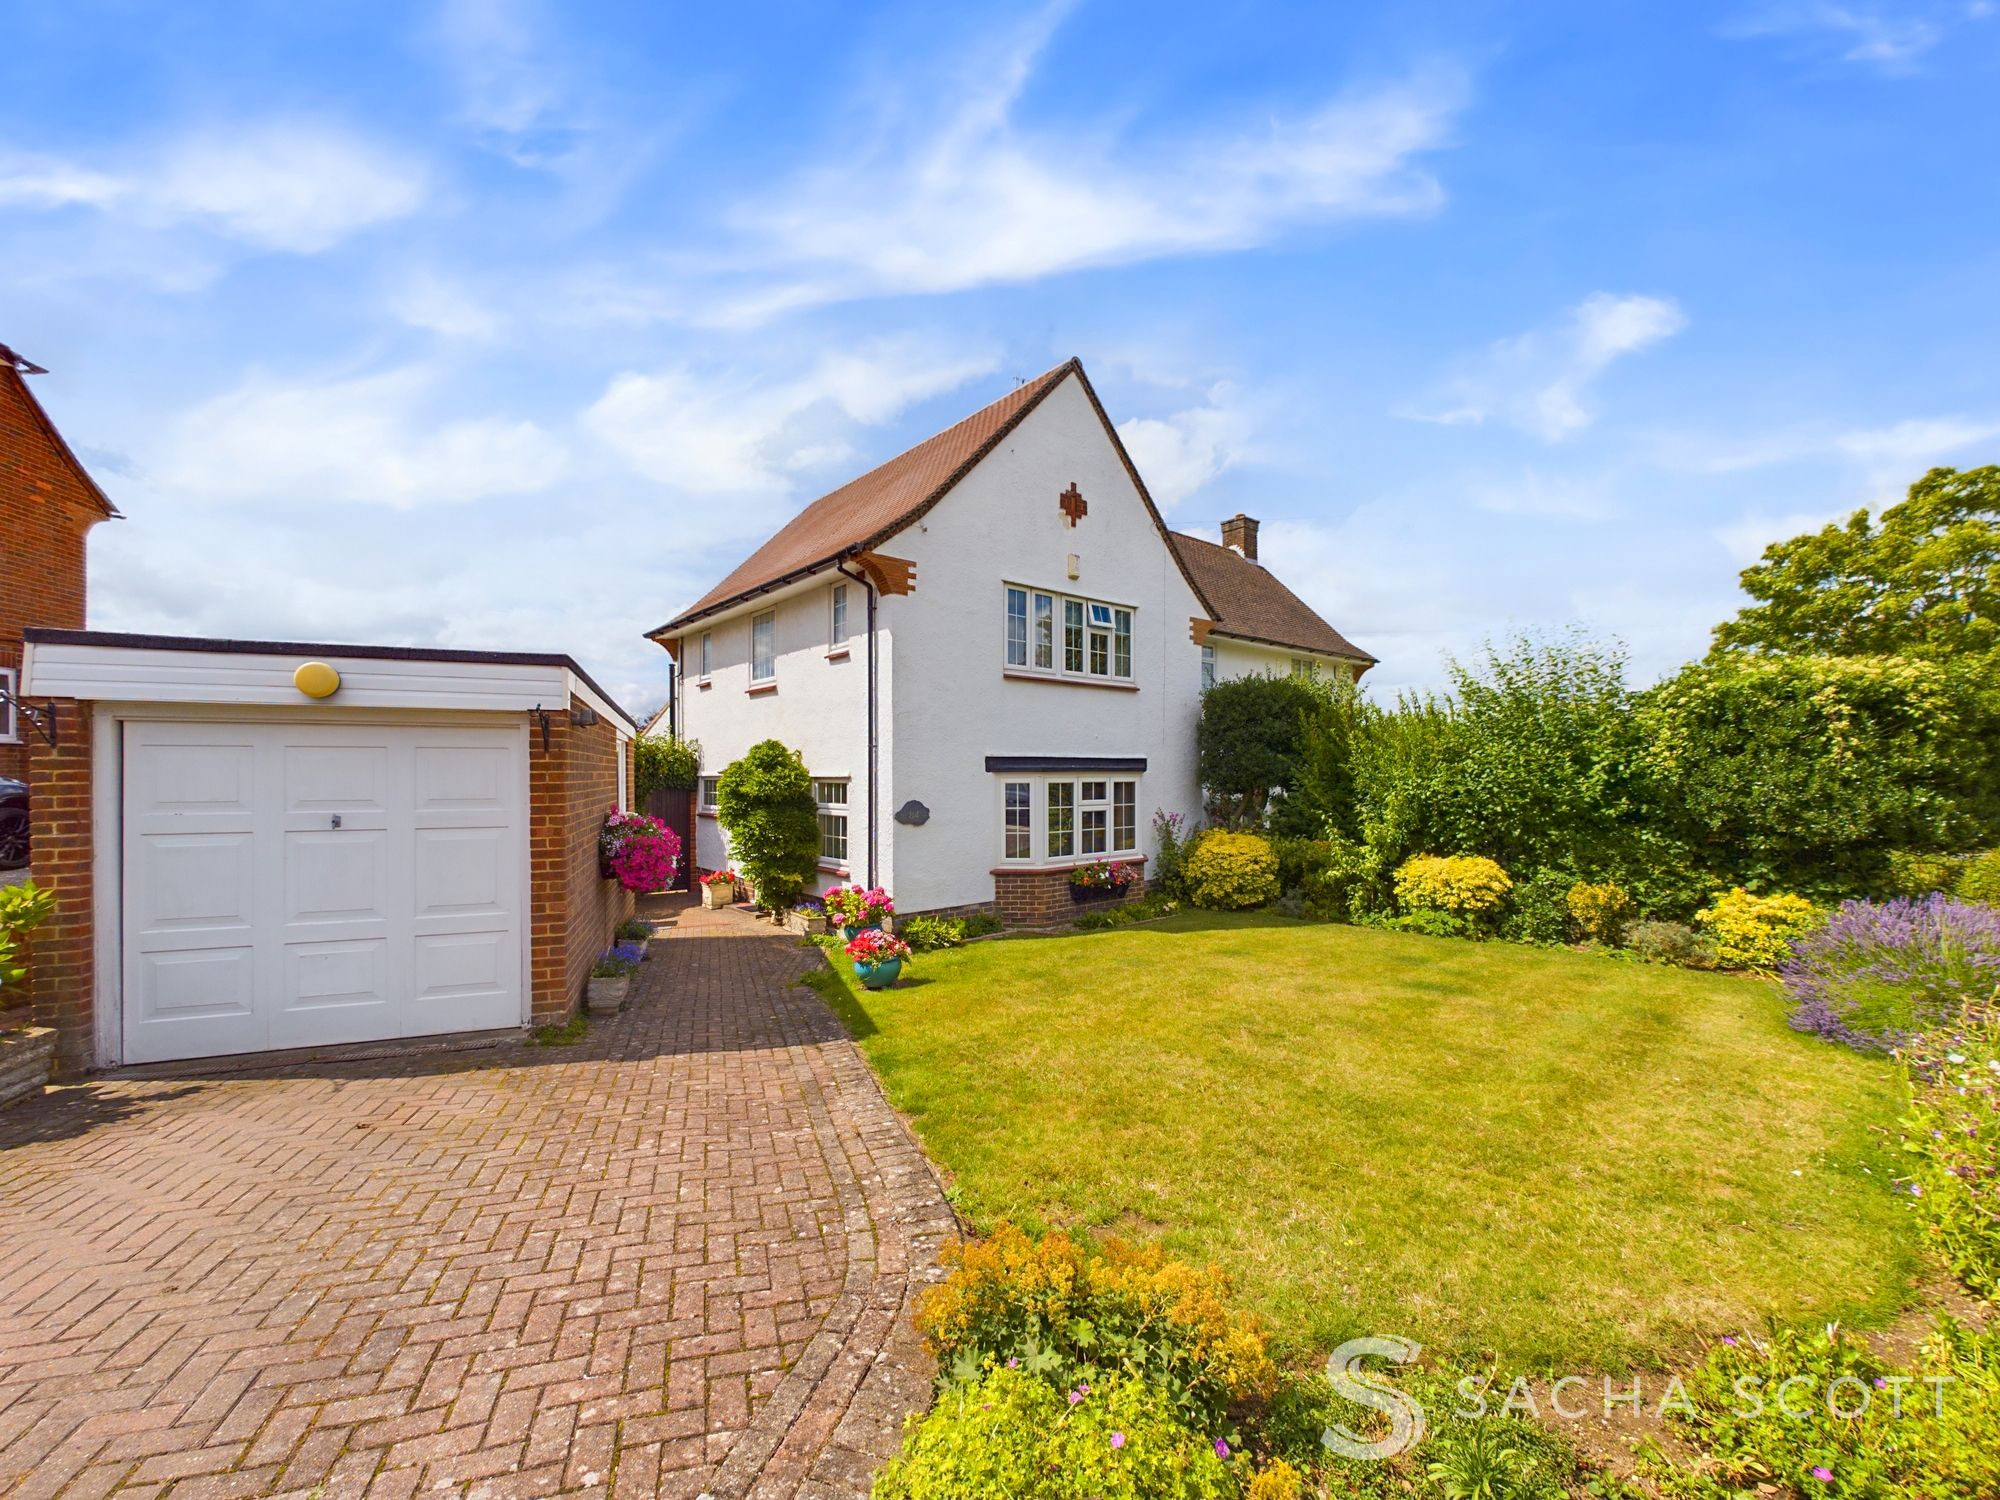 3 bed semi-detached house for sale in Partridge Mead, Banstead - Property Image 1